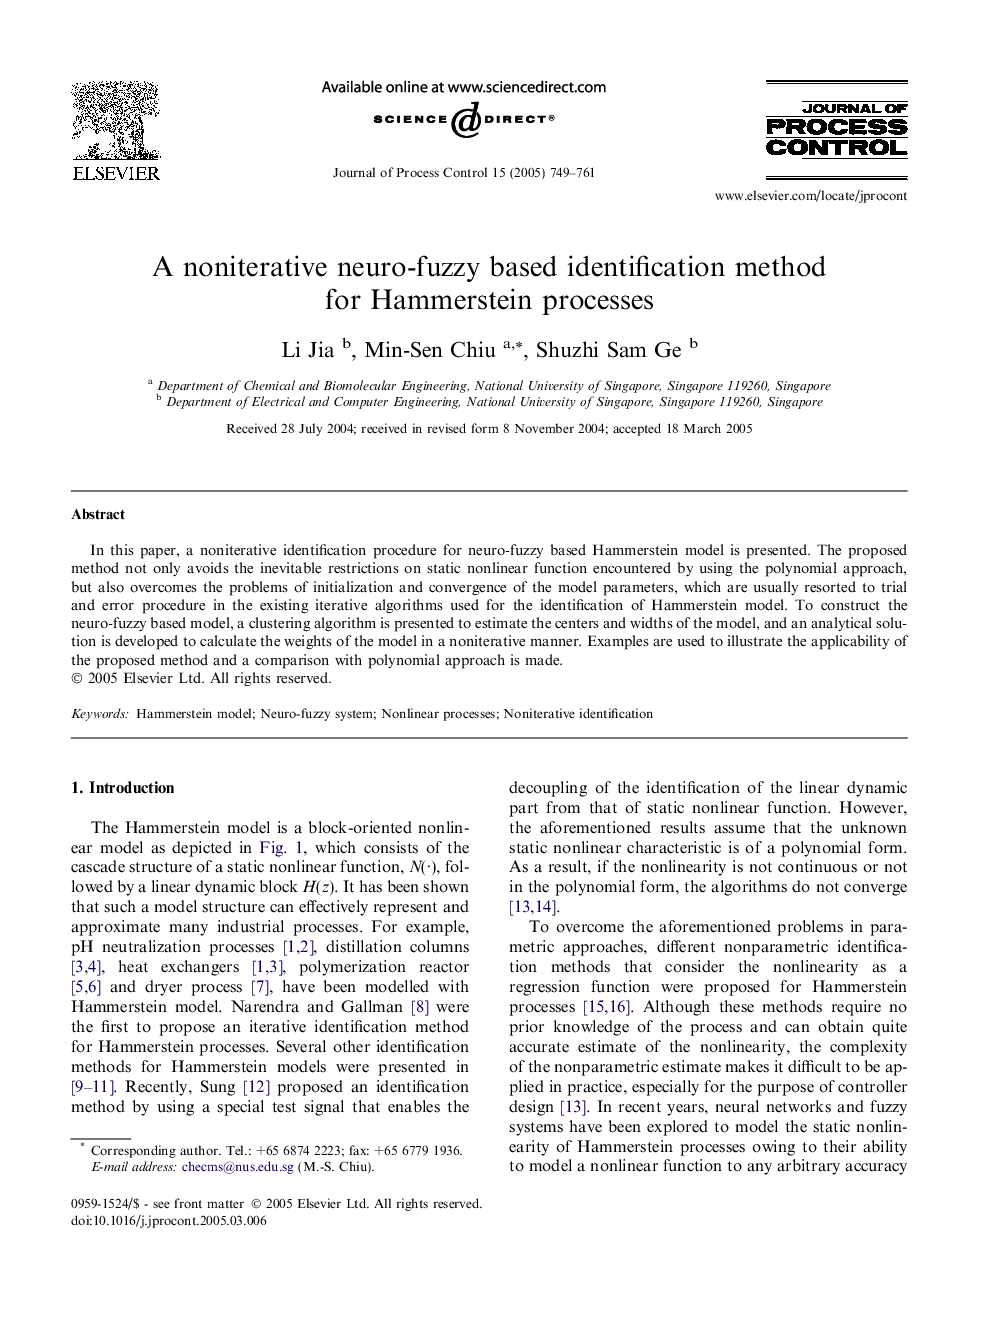 A noniterative neuro-fuzzy based identification method for Hammerstein processes